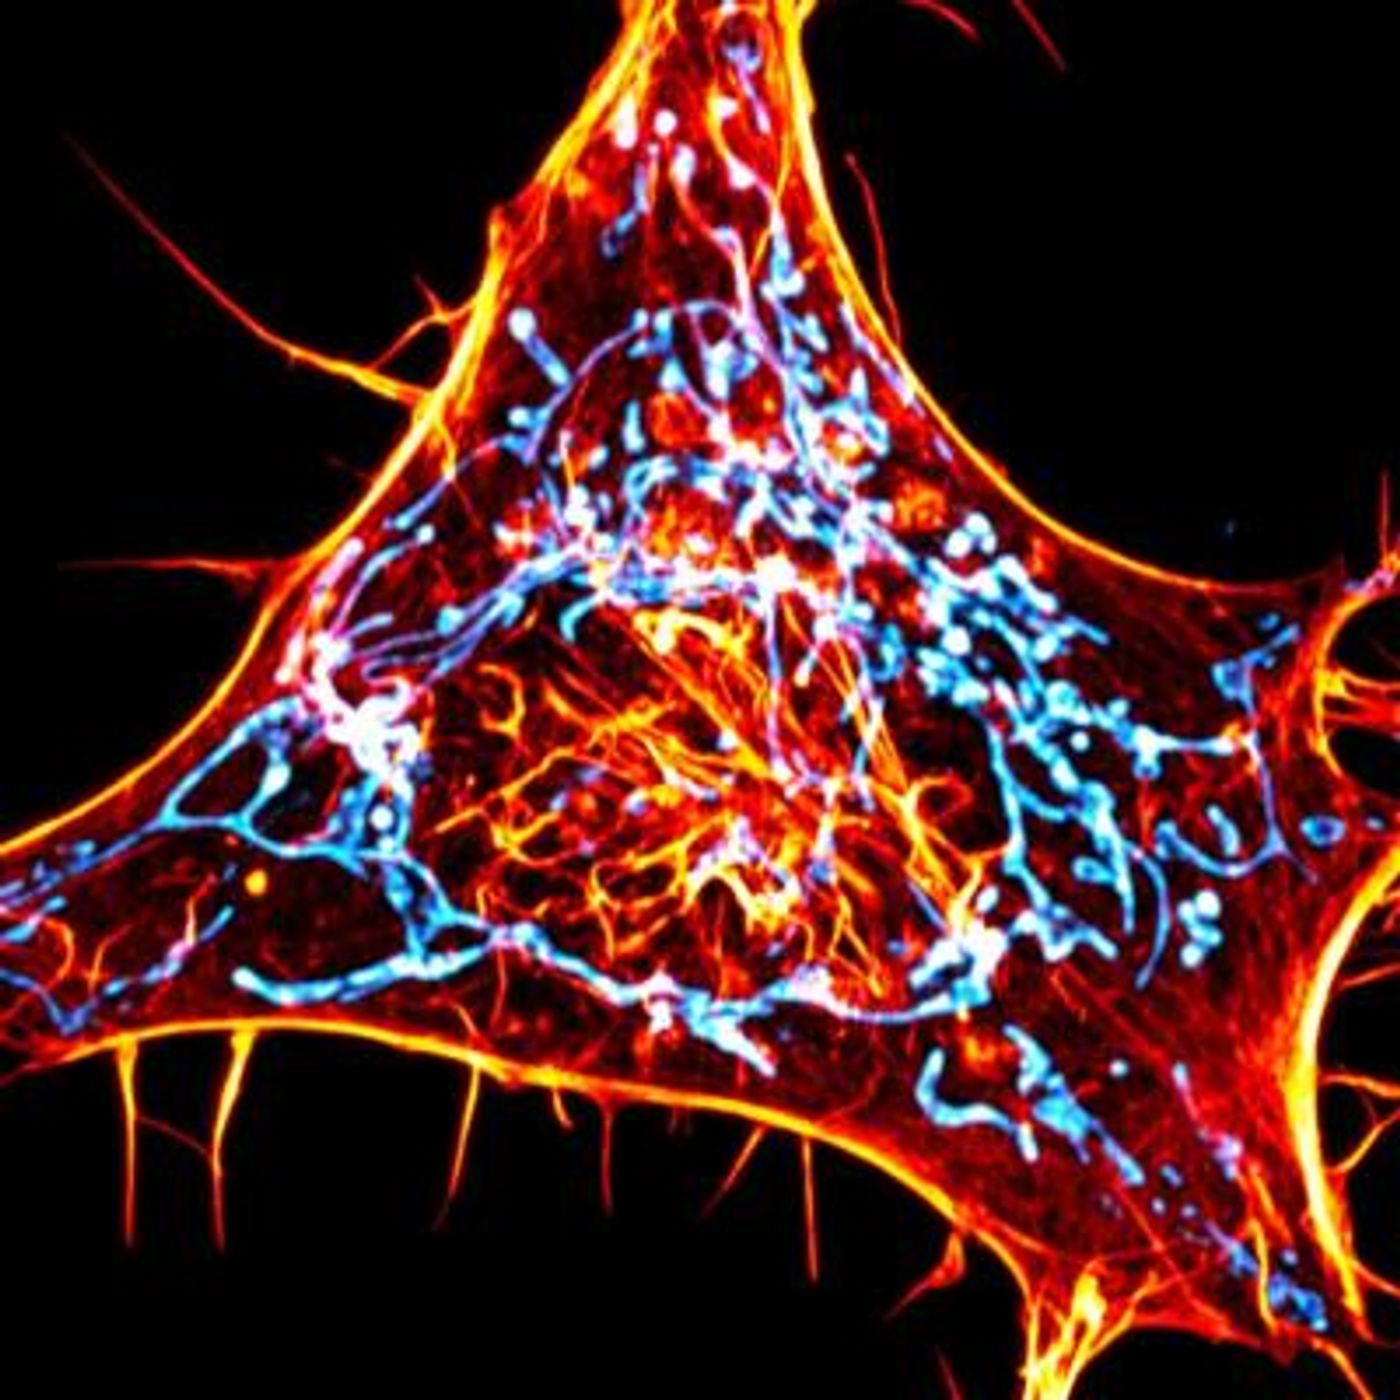 A cancer cell labeled for actin (red) and mitochondria (cyan). The scientists designed novel probes that specifically monitor interactions between actin and mitochondria. / Credit: Salk Institute/Waitt Advanced Biophotonics Center